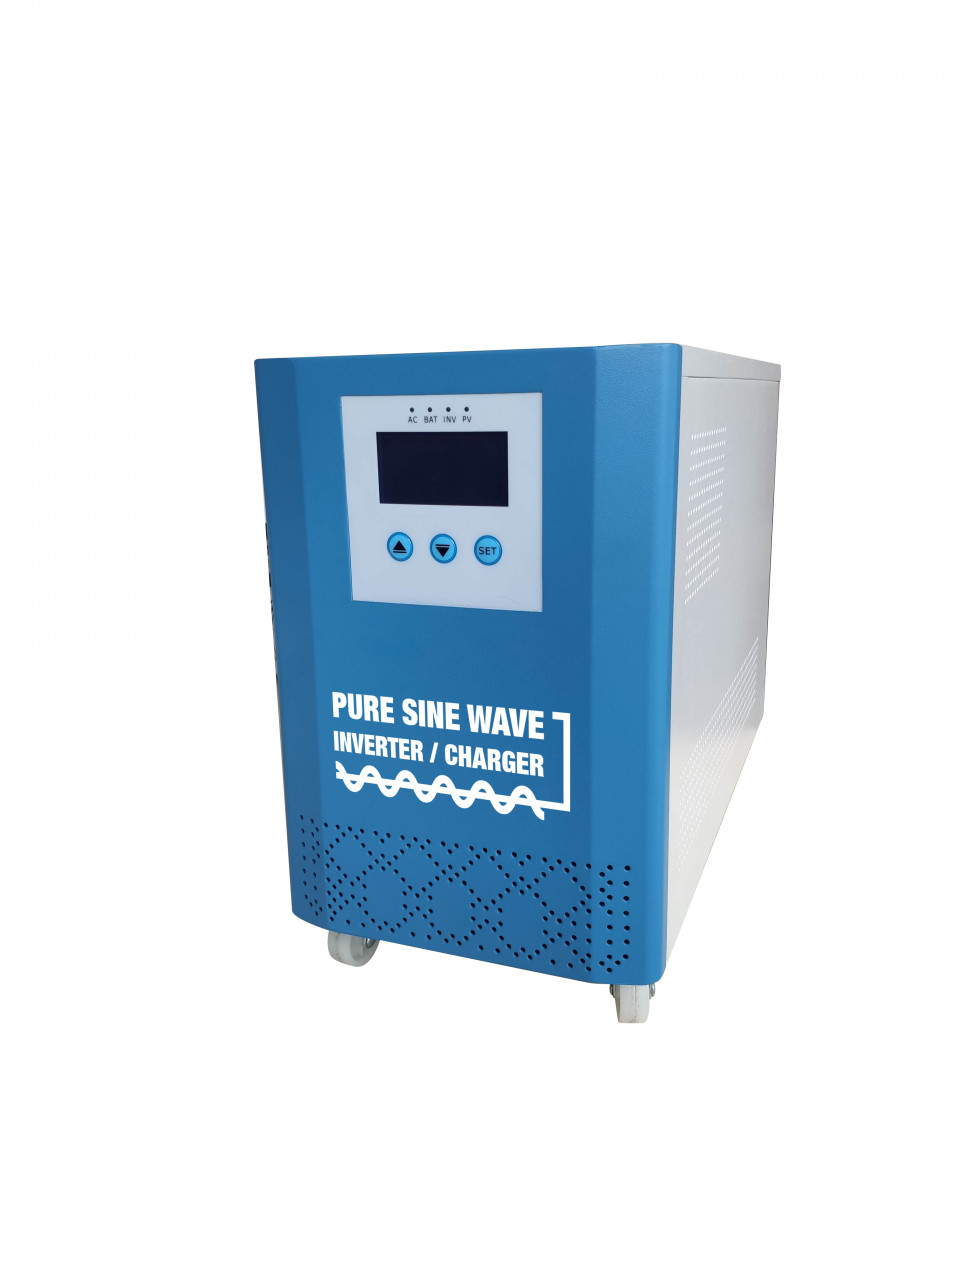 low frequency pure sine wave inverter charger 1KW 2KW 3KW 4KW 5KW 6KW 12V 24V 48V